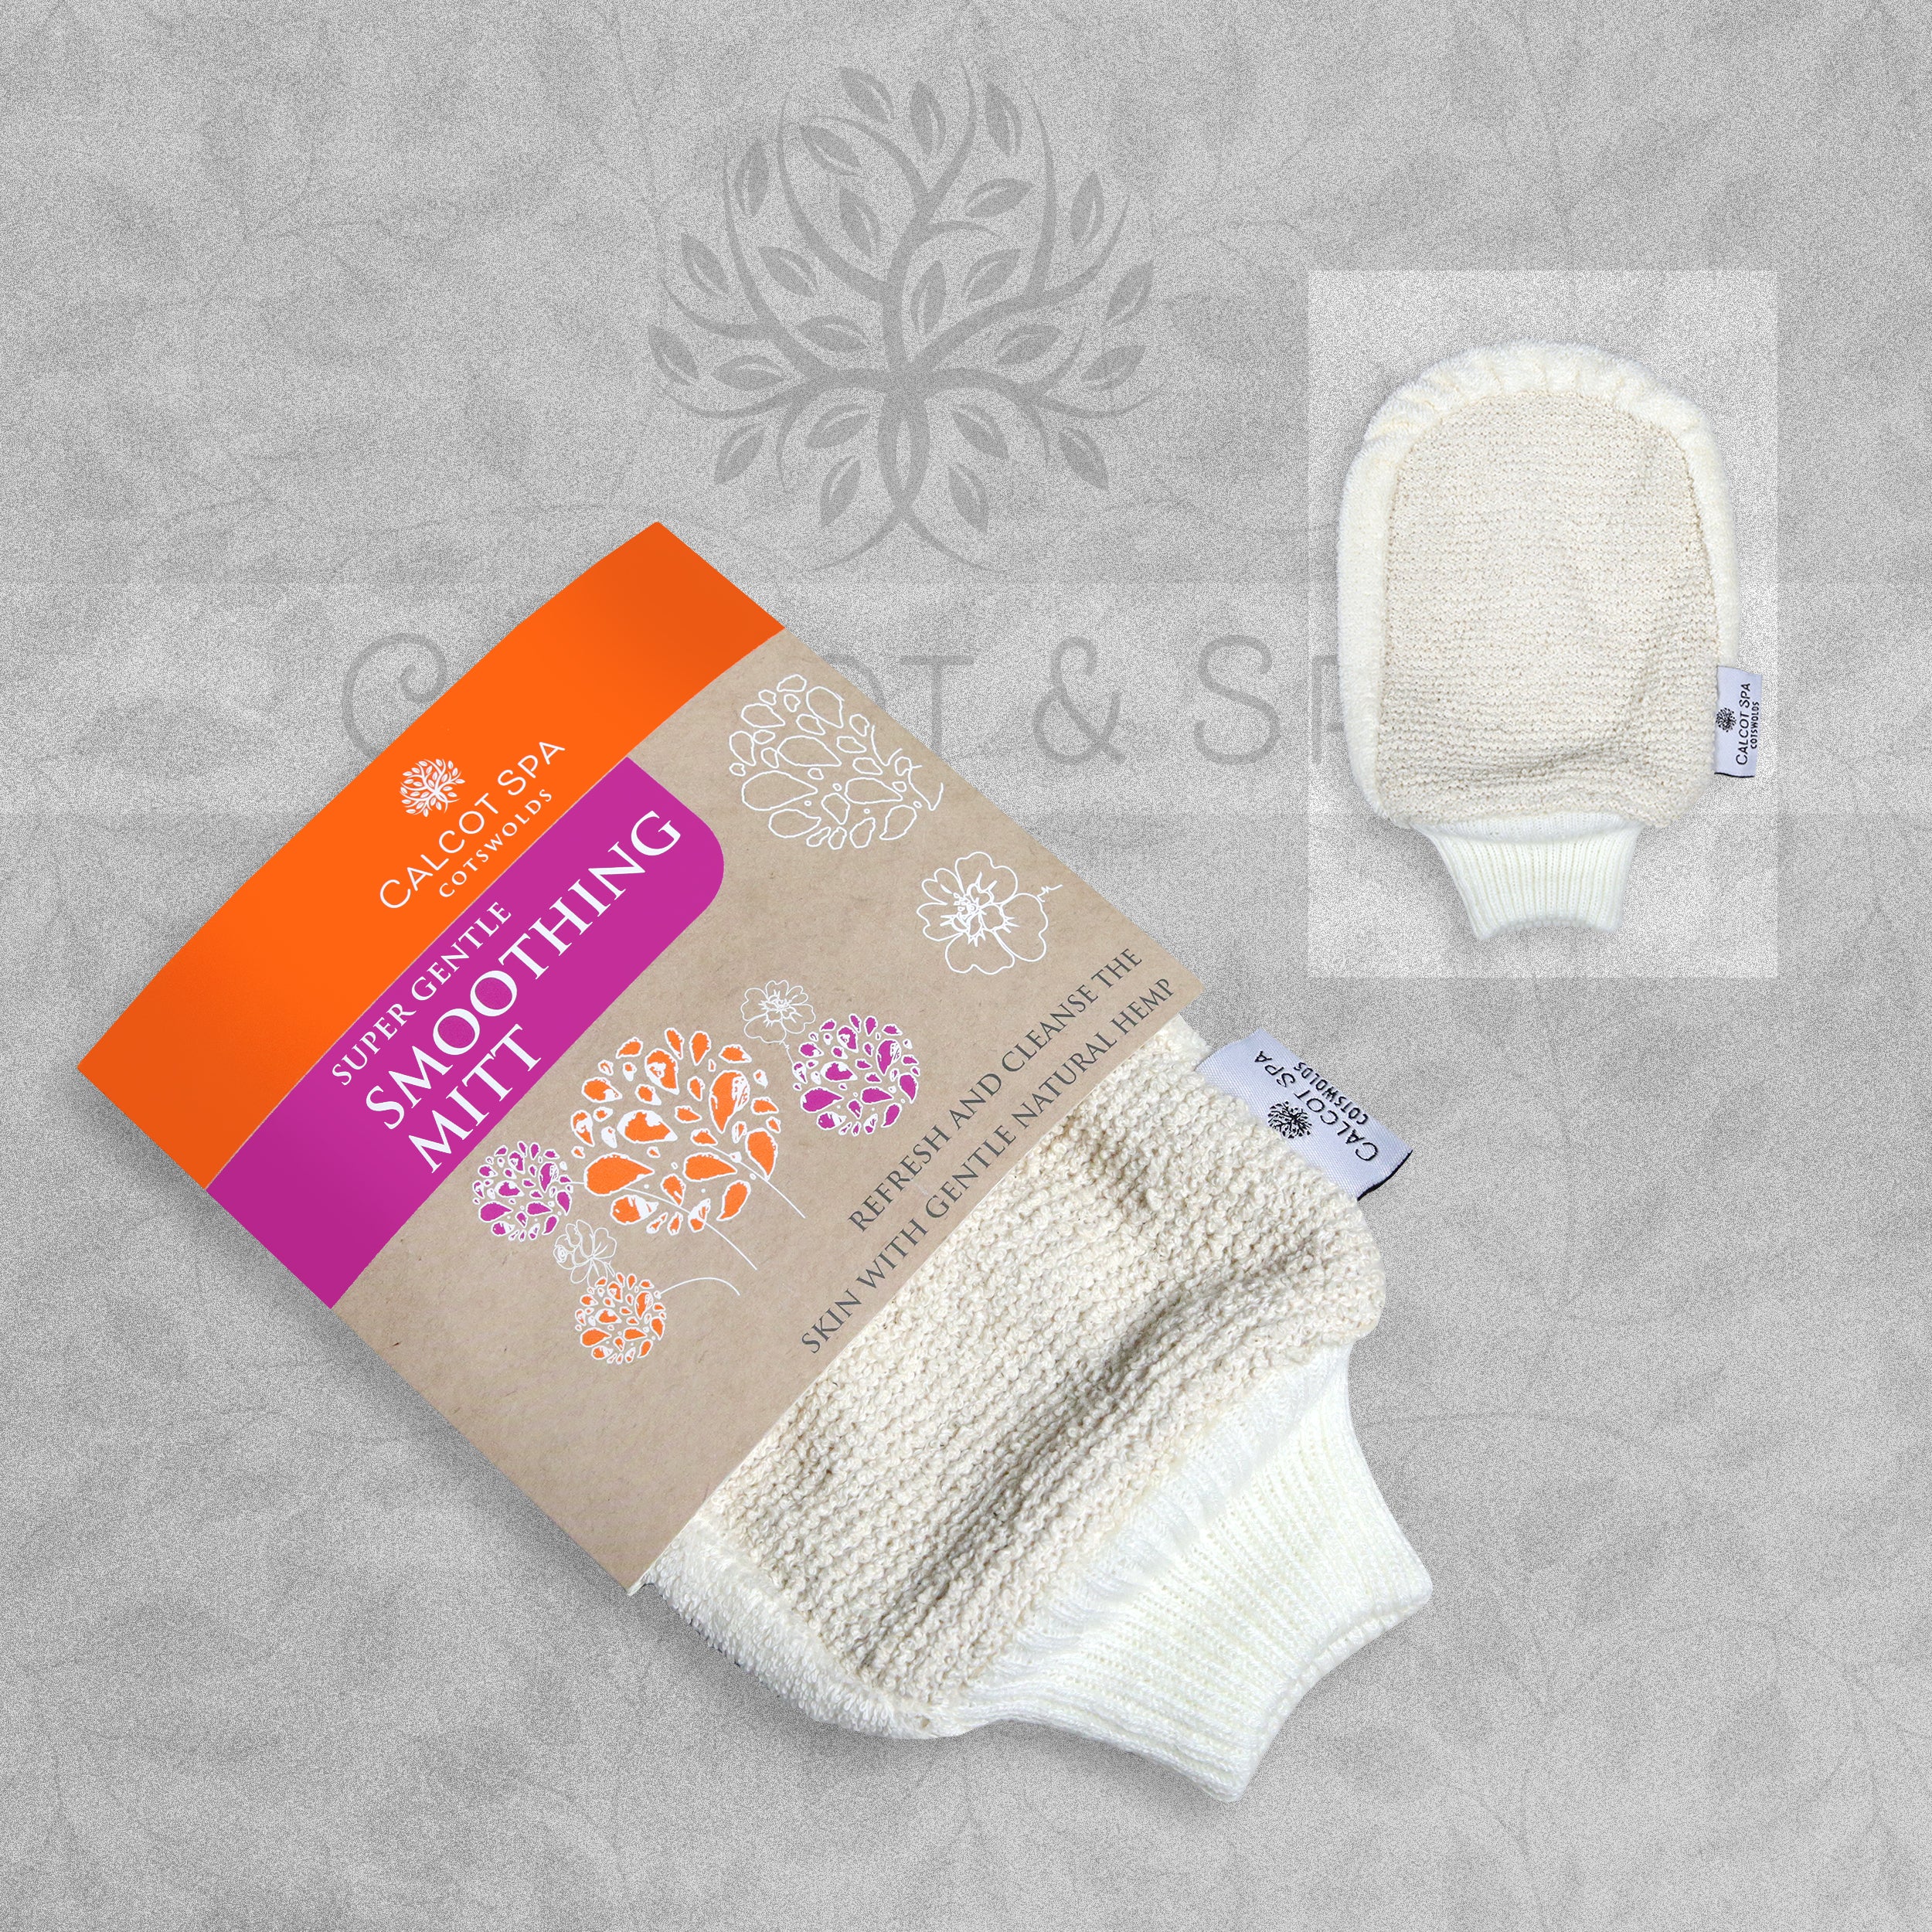 Calcot Spa Super Gentle Smoothing Mitt